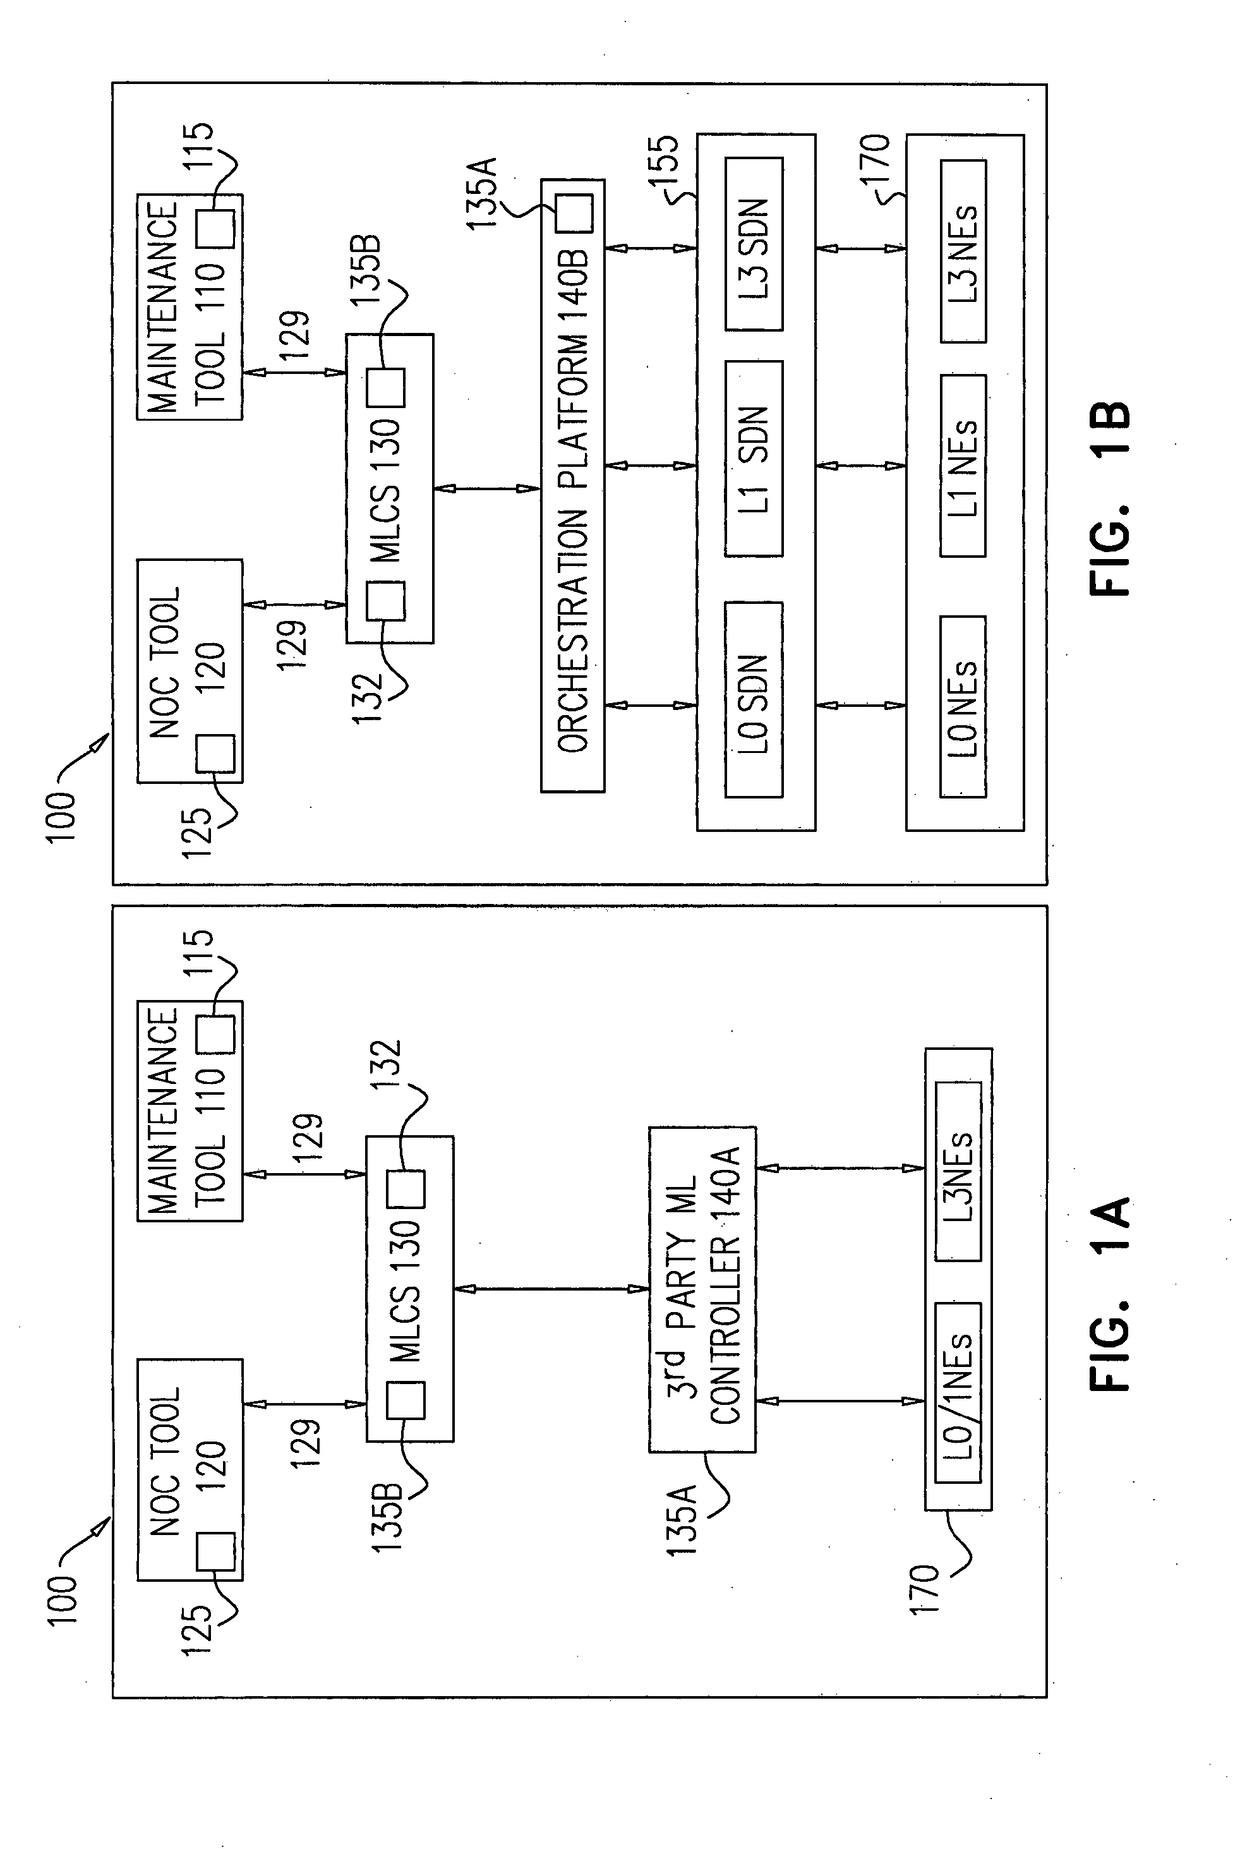 Systems and methods for managing multi-layer communication networks